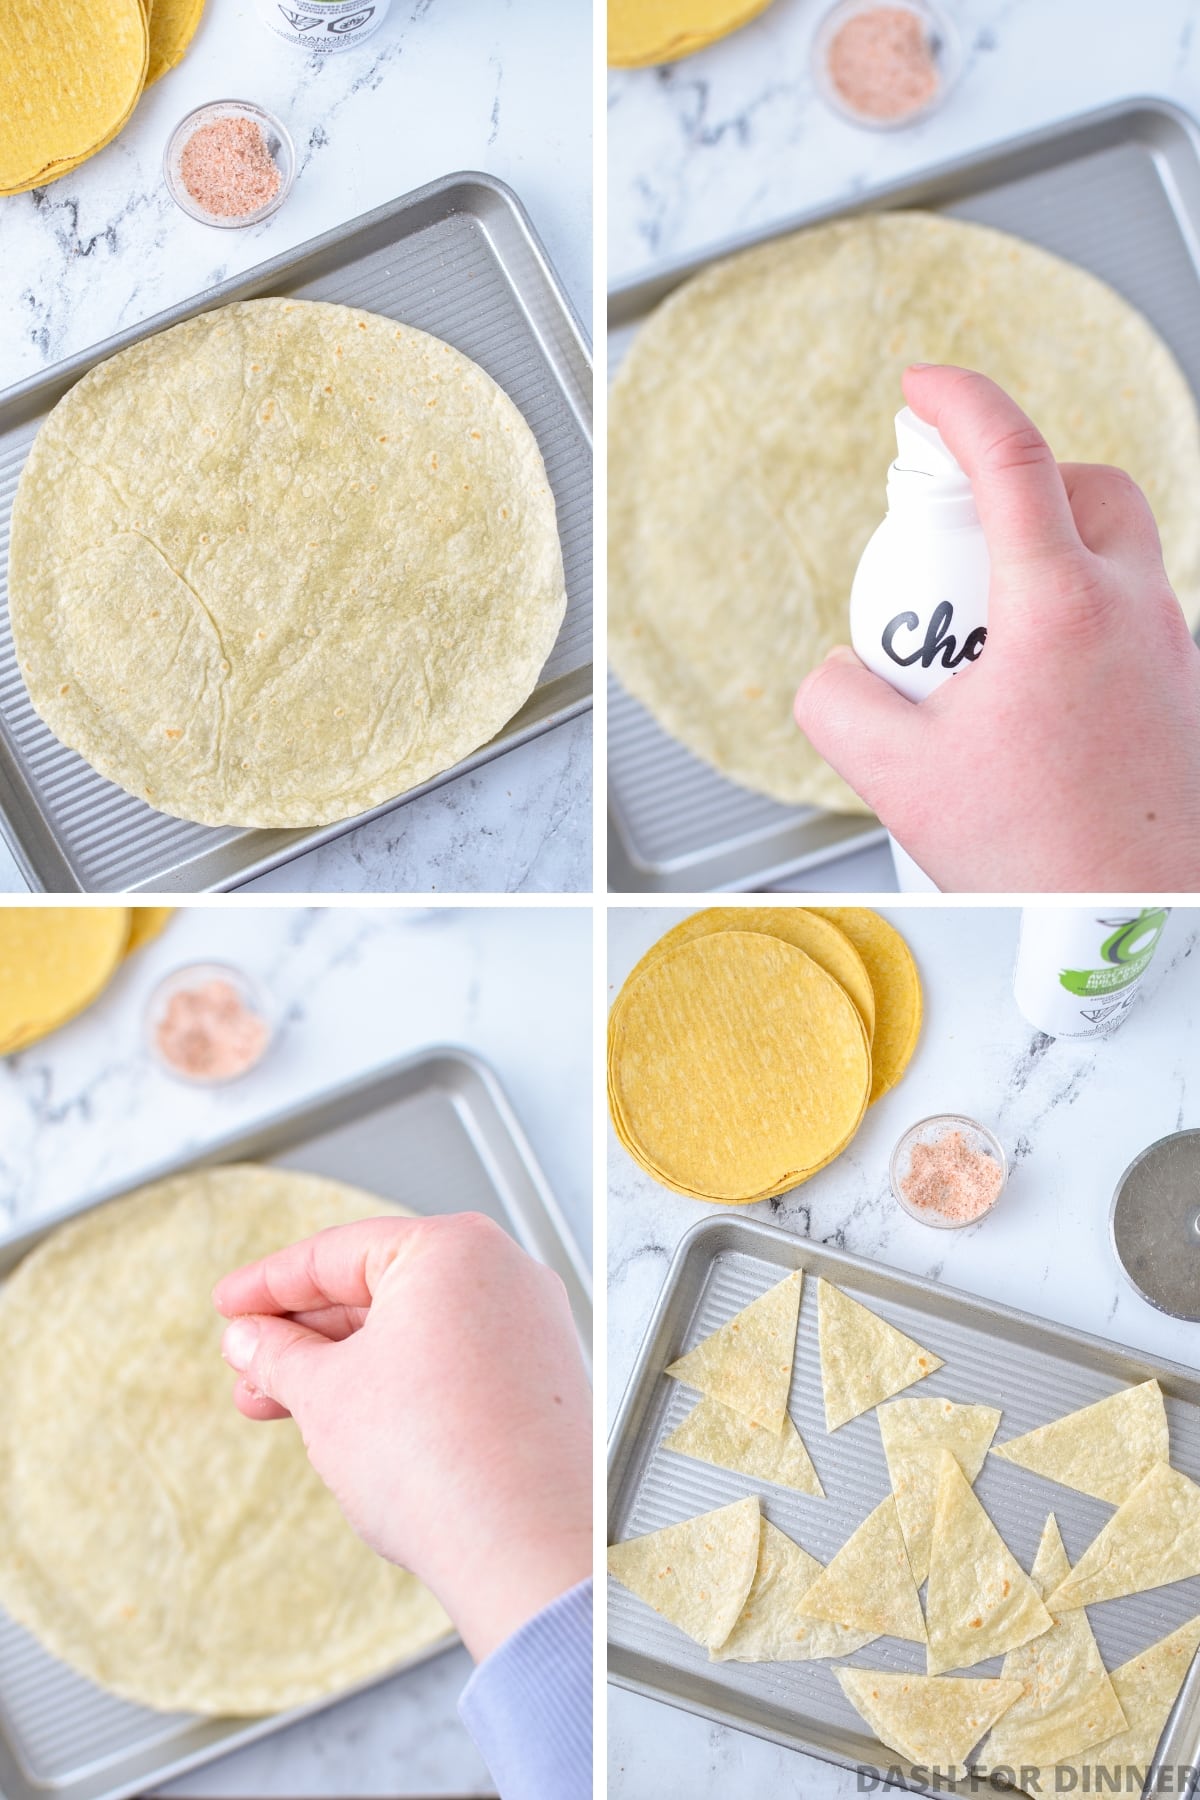 Spraying a tortilla with cooking spray, and then sprinkling with salt and cutting into triangles.